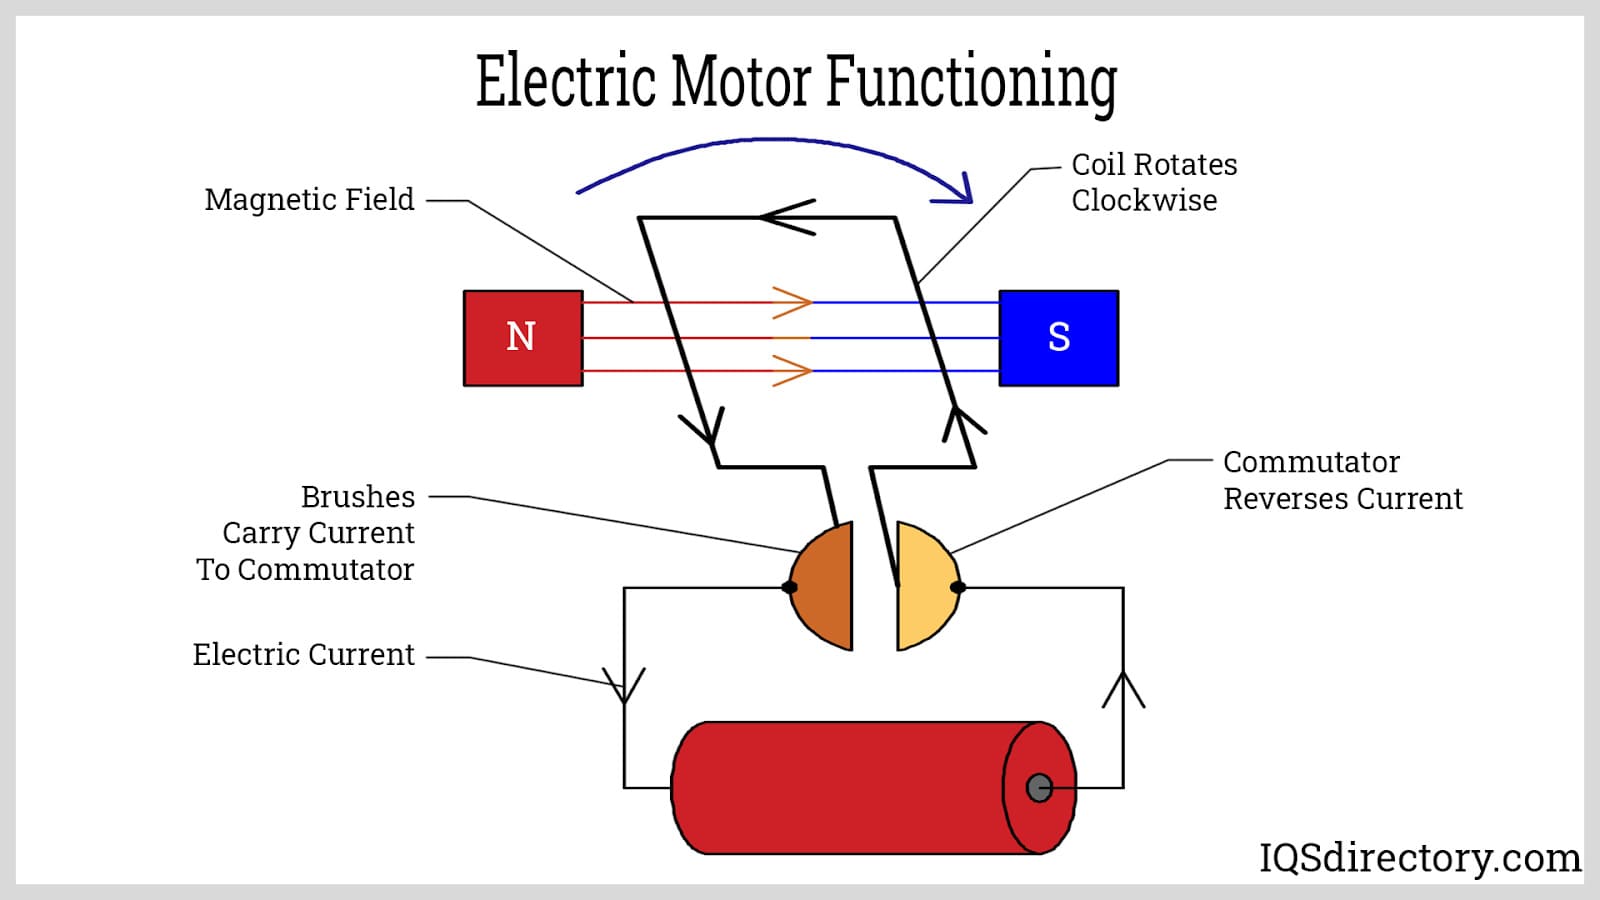 https://www.iqsdirectory.com/articles/electric-motor/electric-motor-functioning.jpg